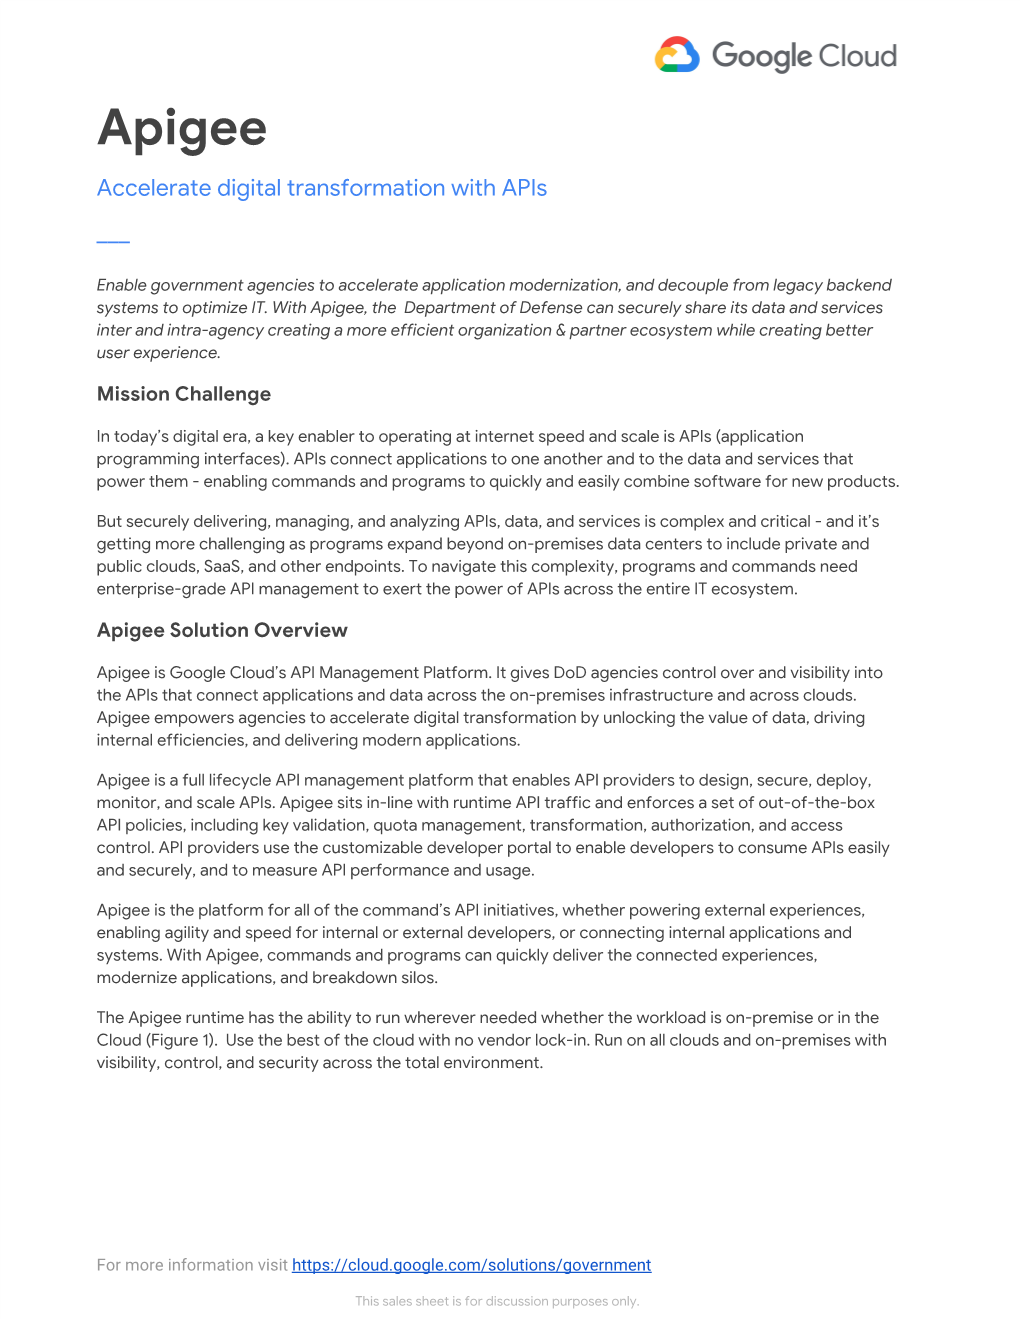 Apigee Accelerate Digital Transformation with Apis ___